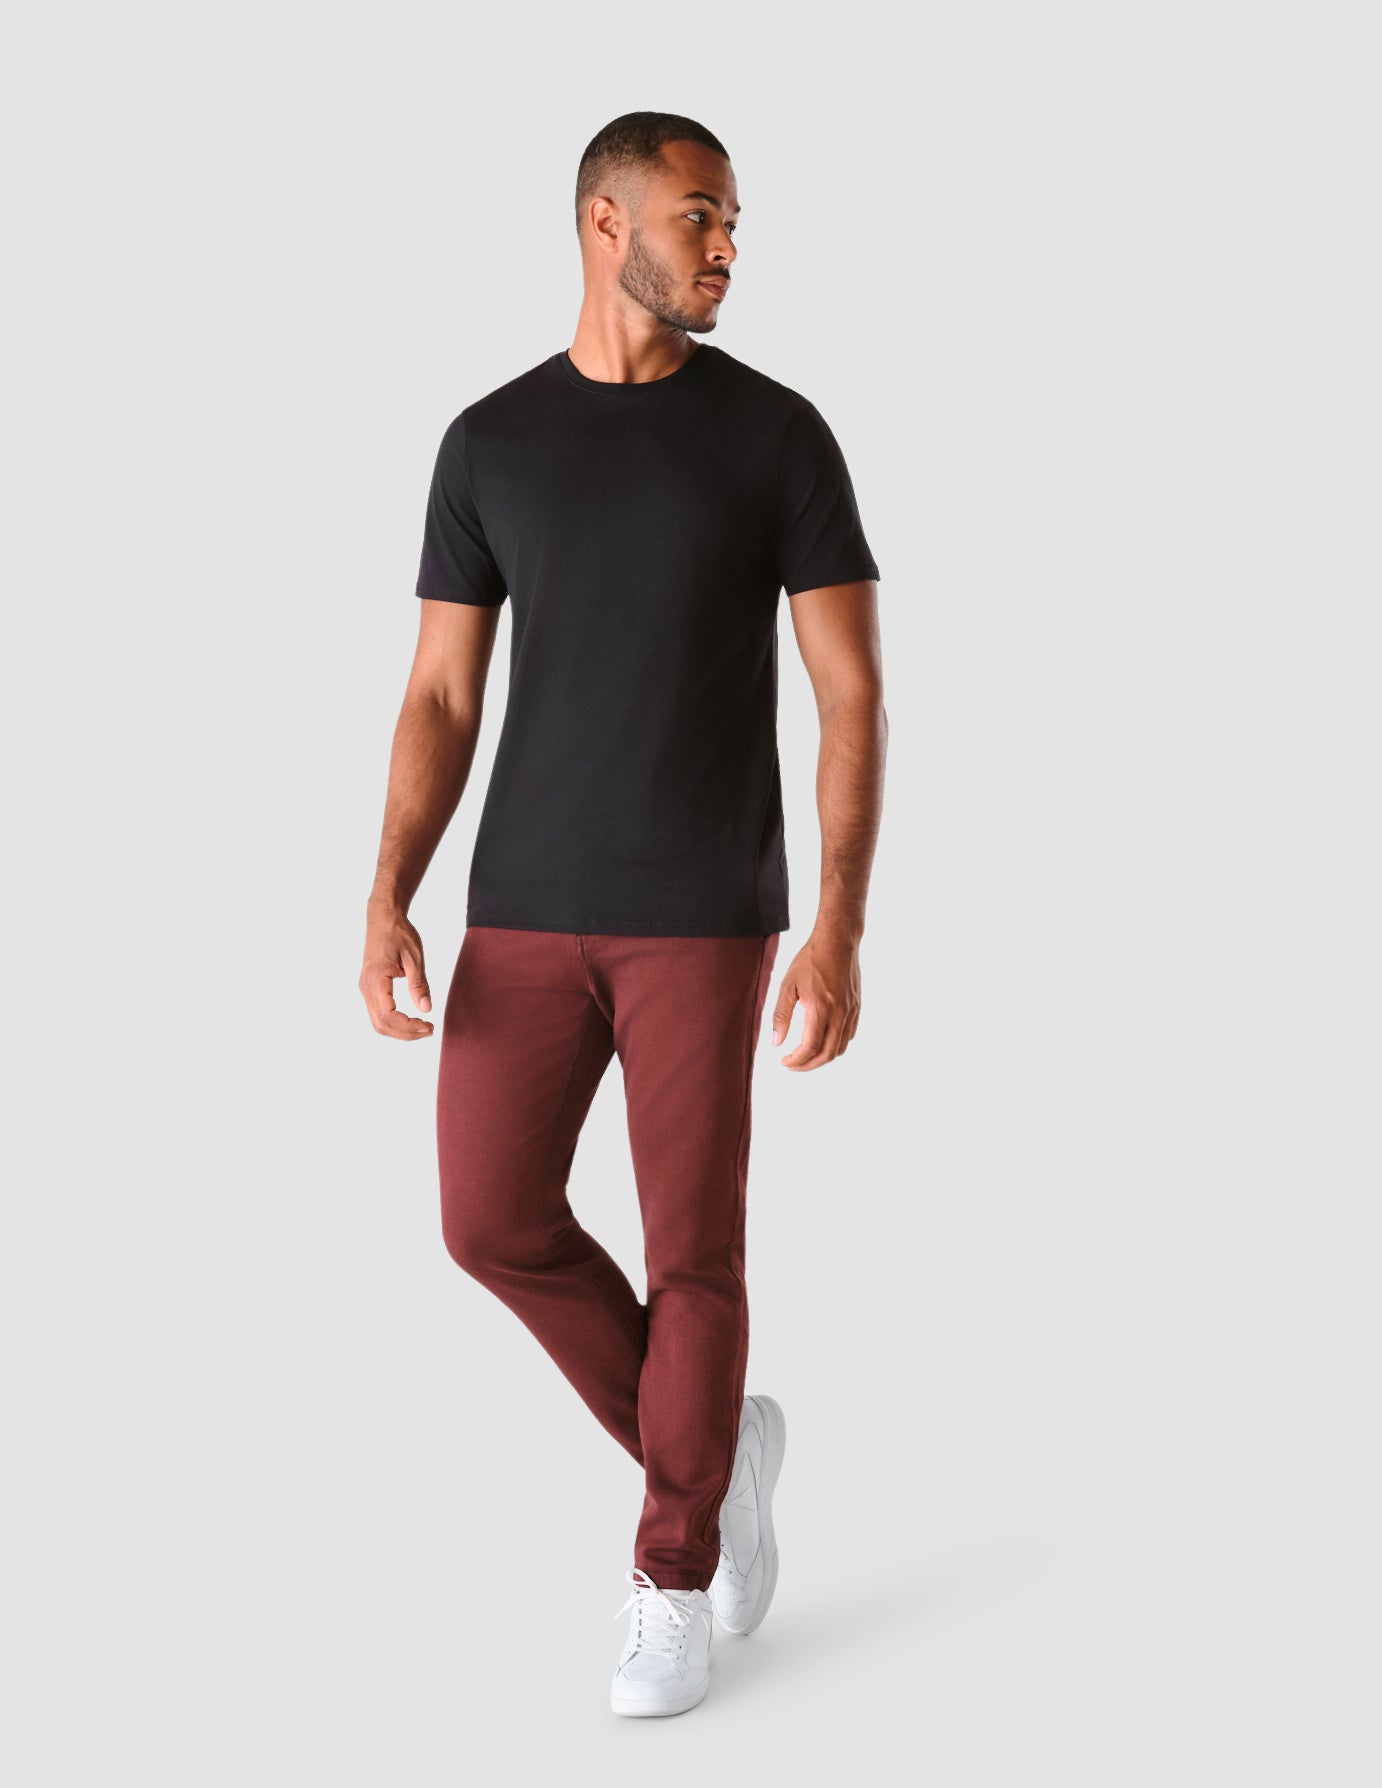 How to wear a burgundy chino - THE NINES